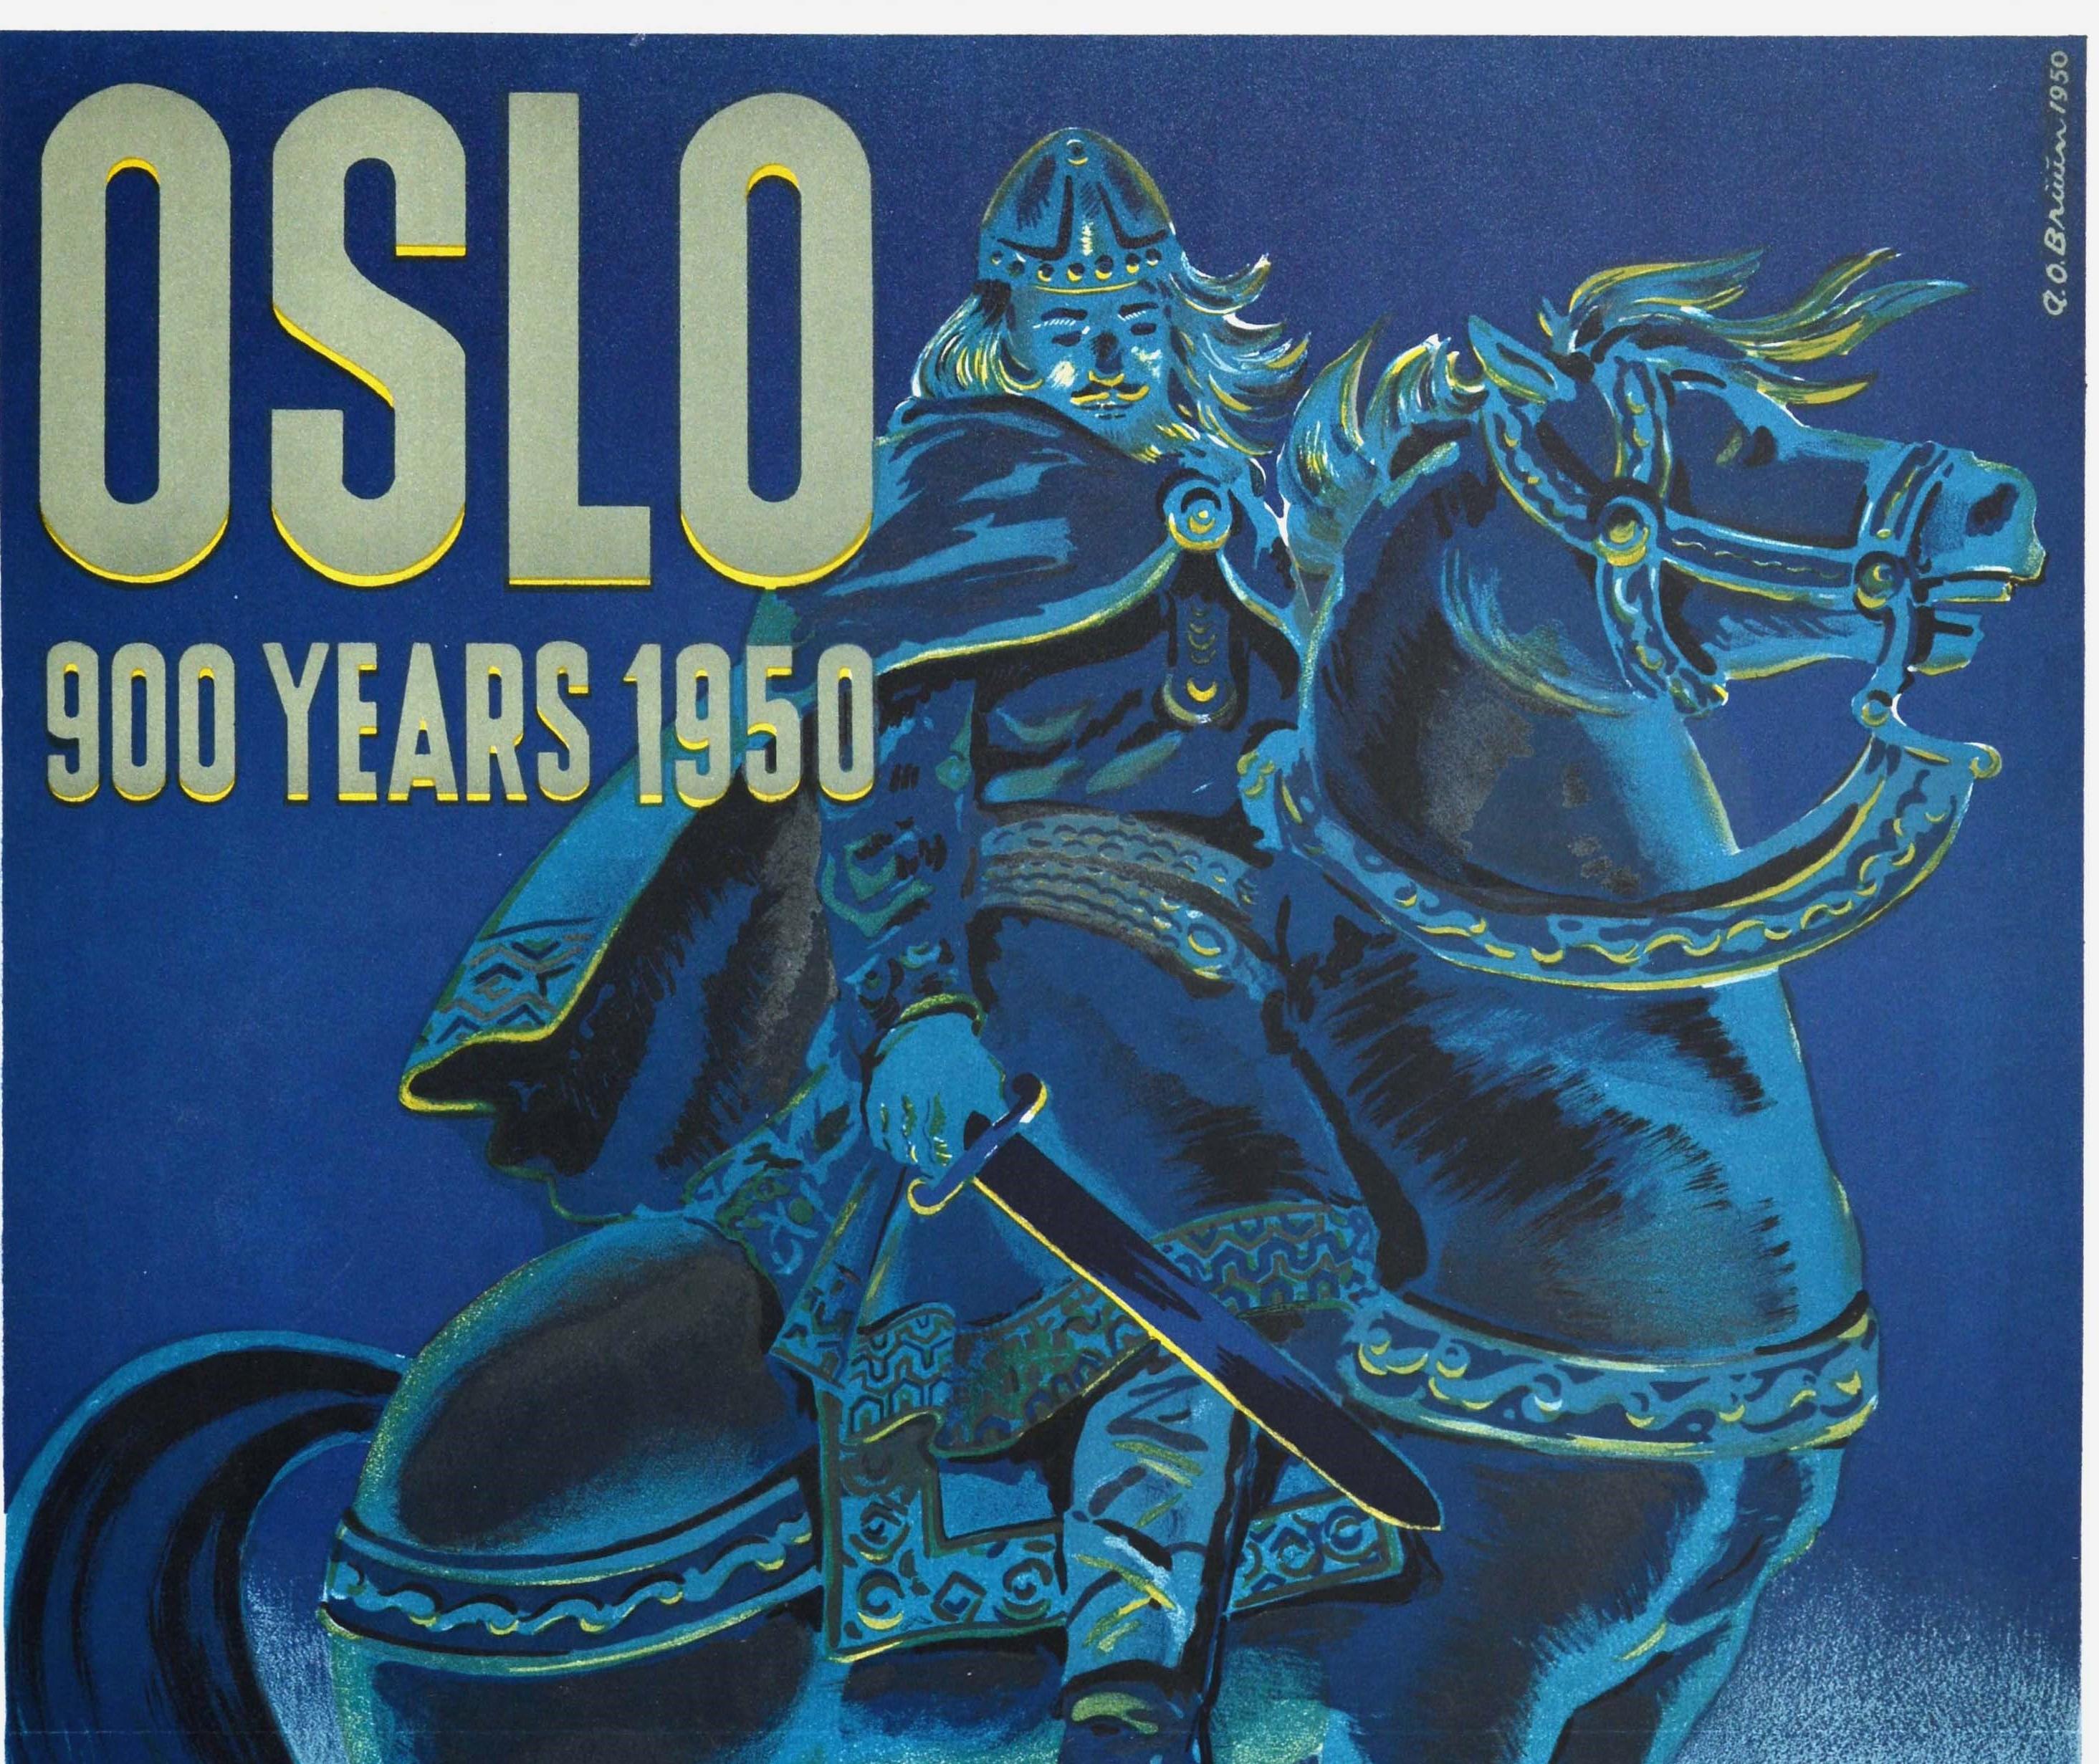 Original vintage railway travel poster for Oslo Norway 900 Years 1950 celebrating the historic capital city's anniversary featuring stunning artwork of the Viking King Harald of Norway / Harald Sigurdsson (circa 1015-1066) on a horse and holding a